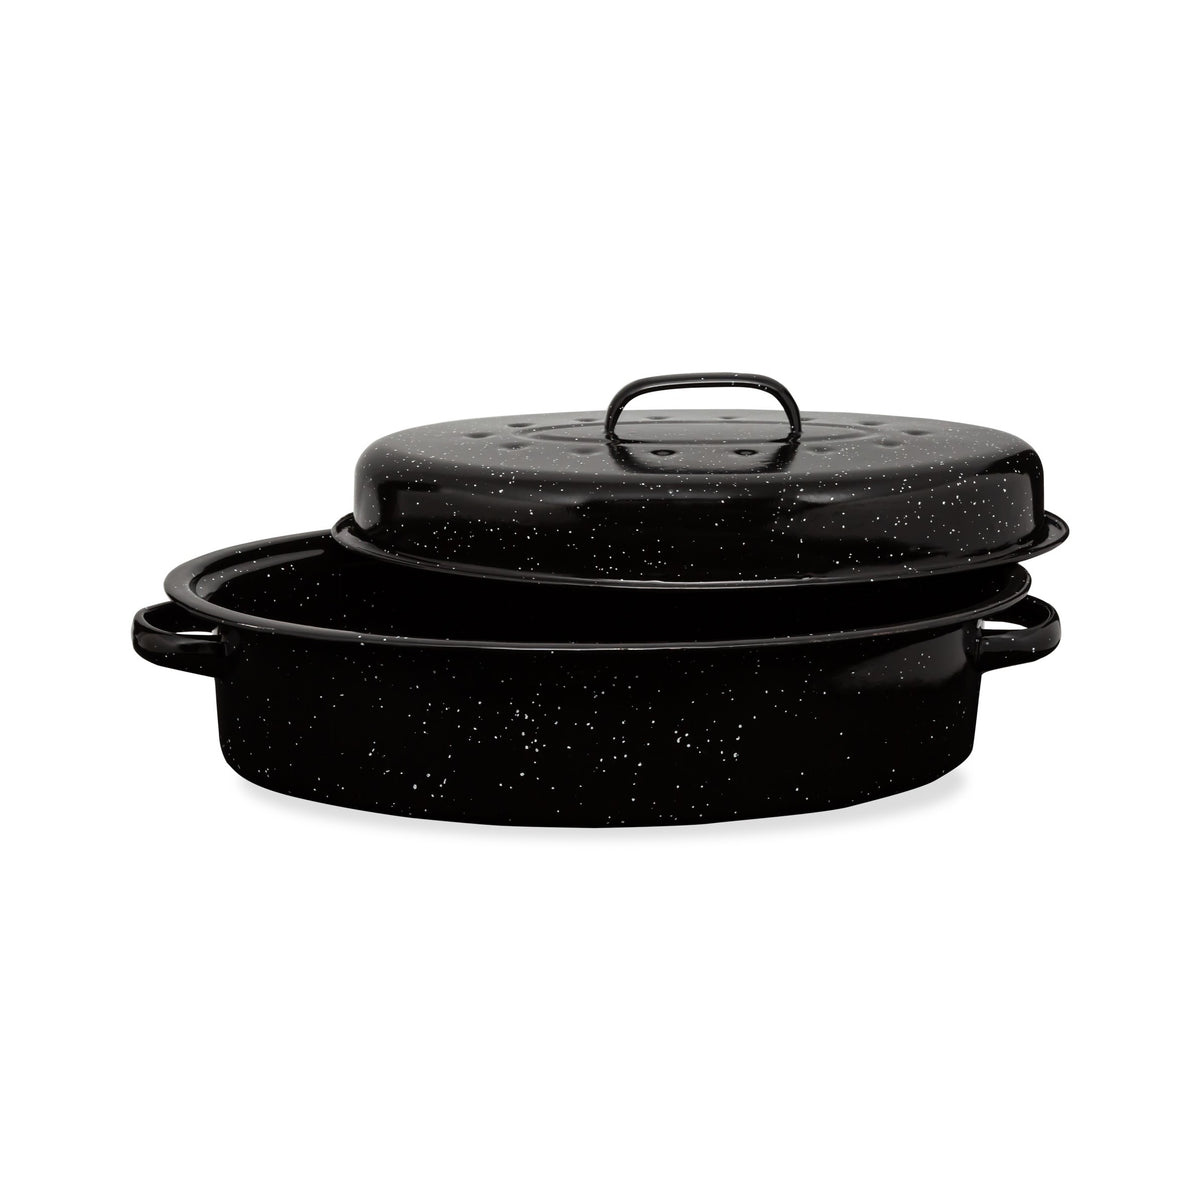 Millvado Granite Large Oval Roaster With Lid